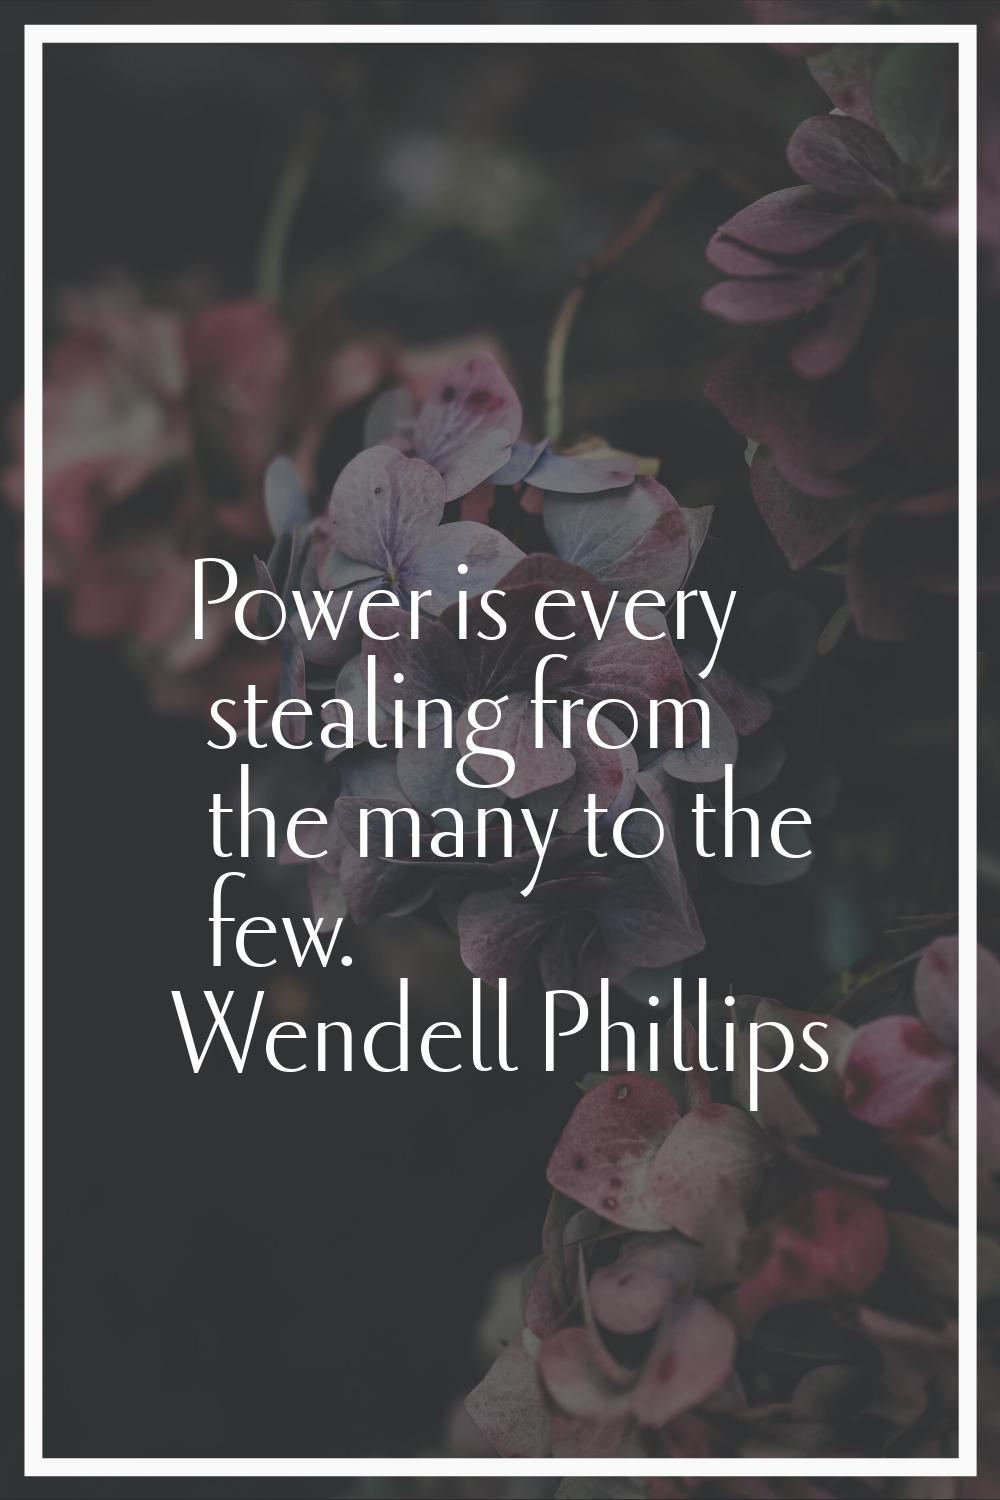 Power is every stealing from the many to the few.